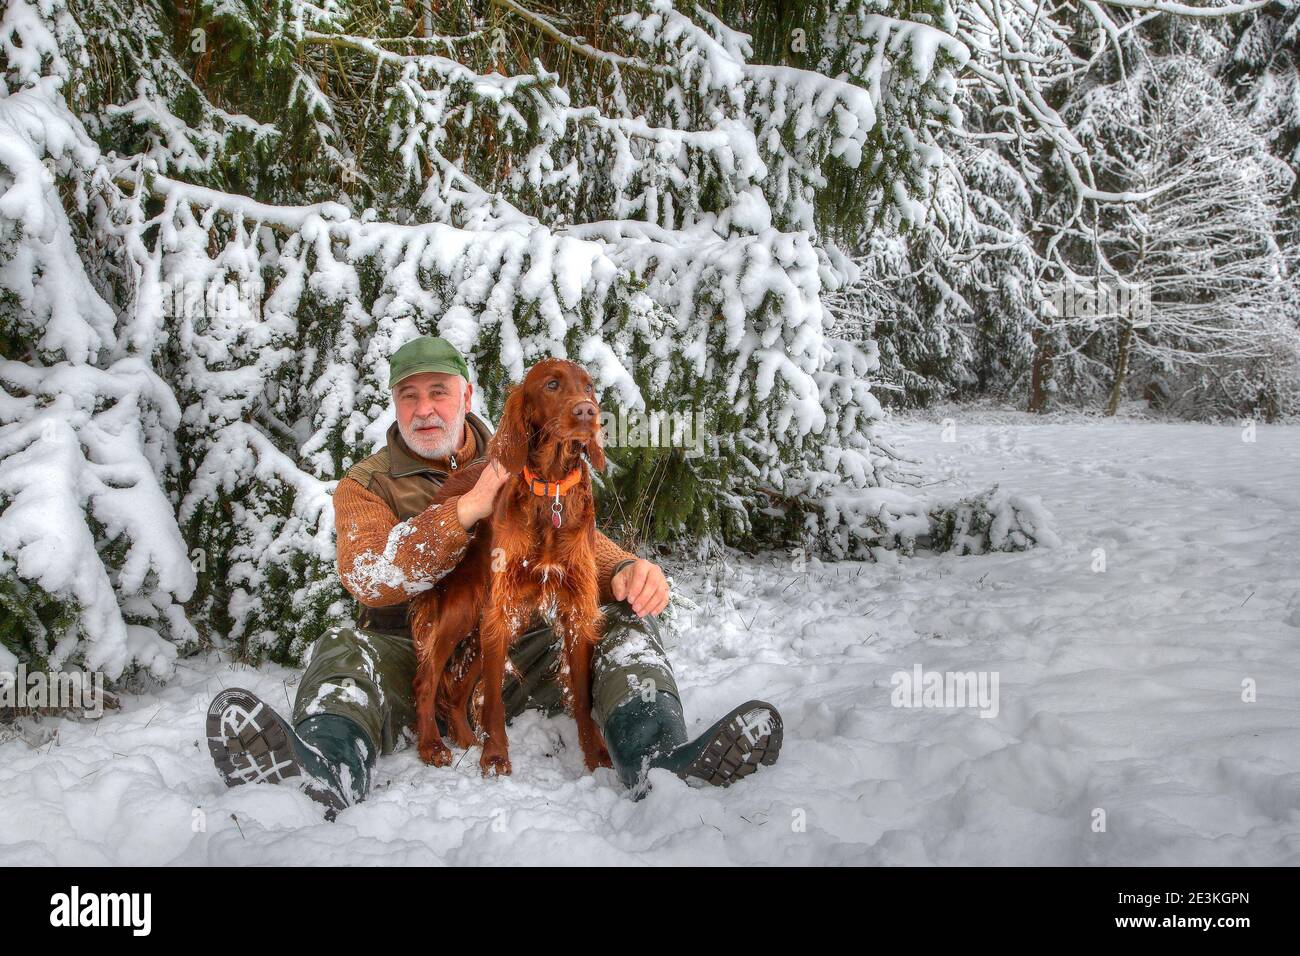 In the snow-covered Black Forest, a hunter sits with his beautiful Irish Setter hunting dog at the edge of the forest in the snow. Stock Photo